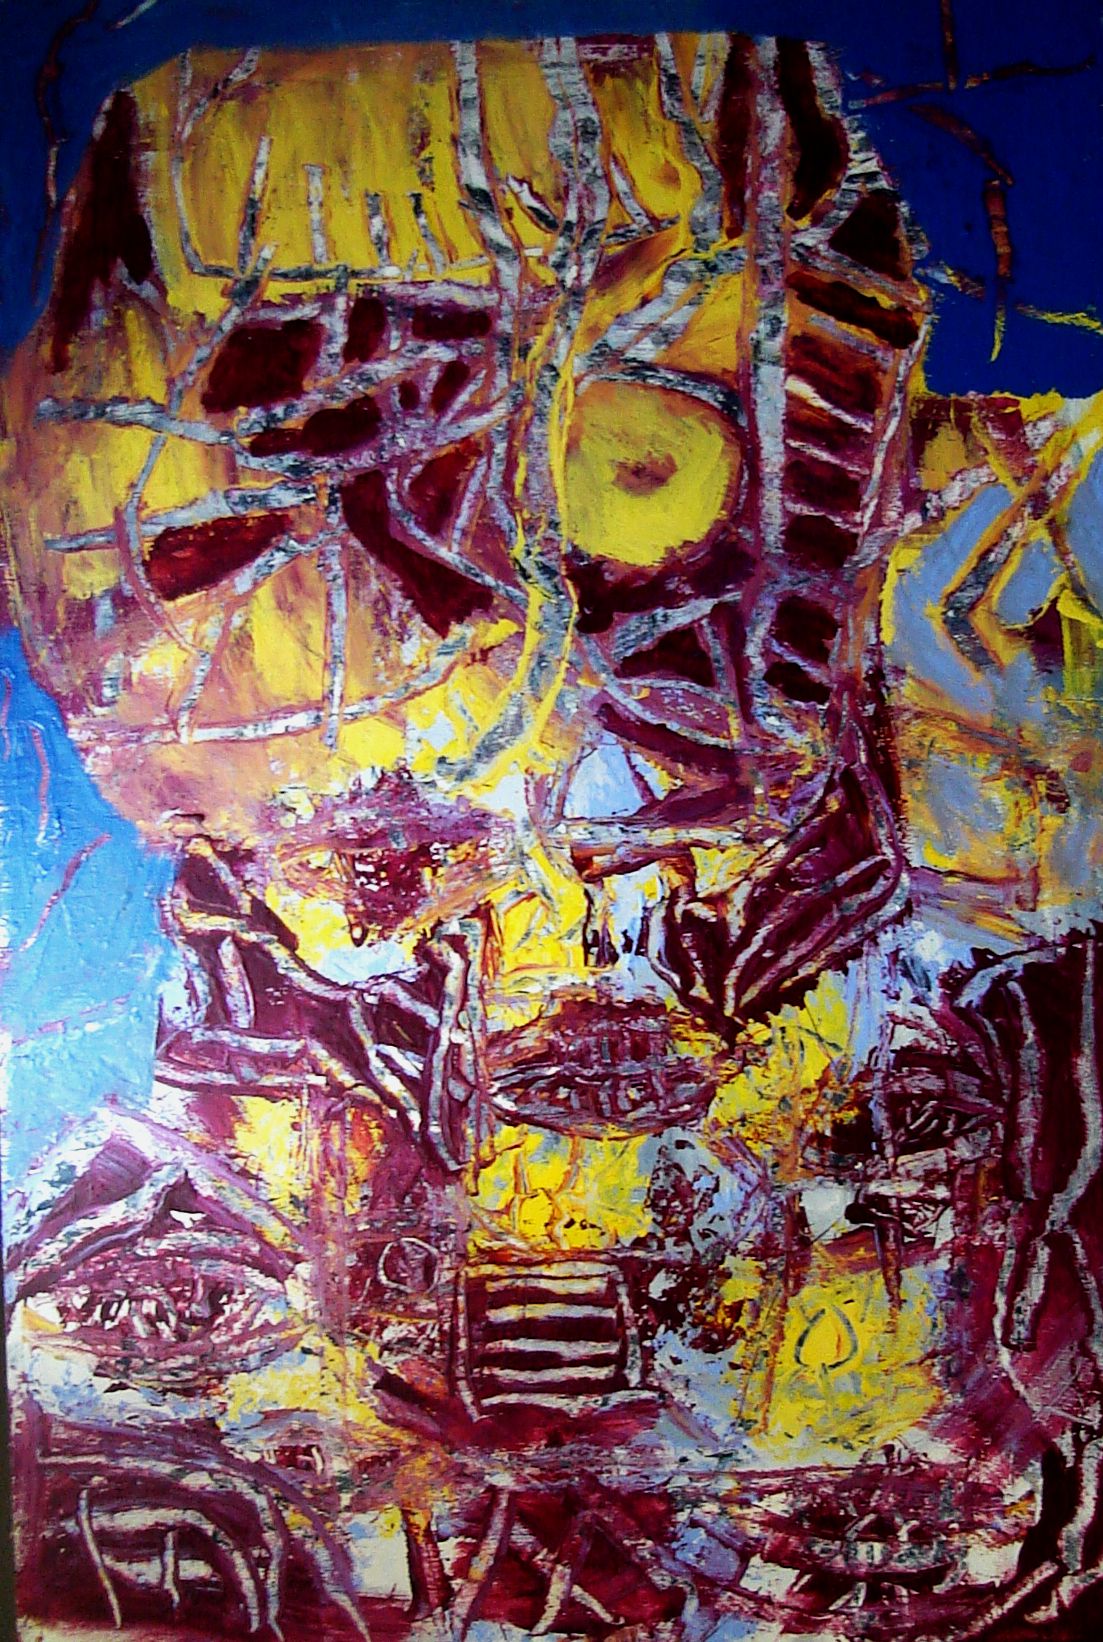 abstract self portrait # 3 by James Robb | ArtWanted.com